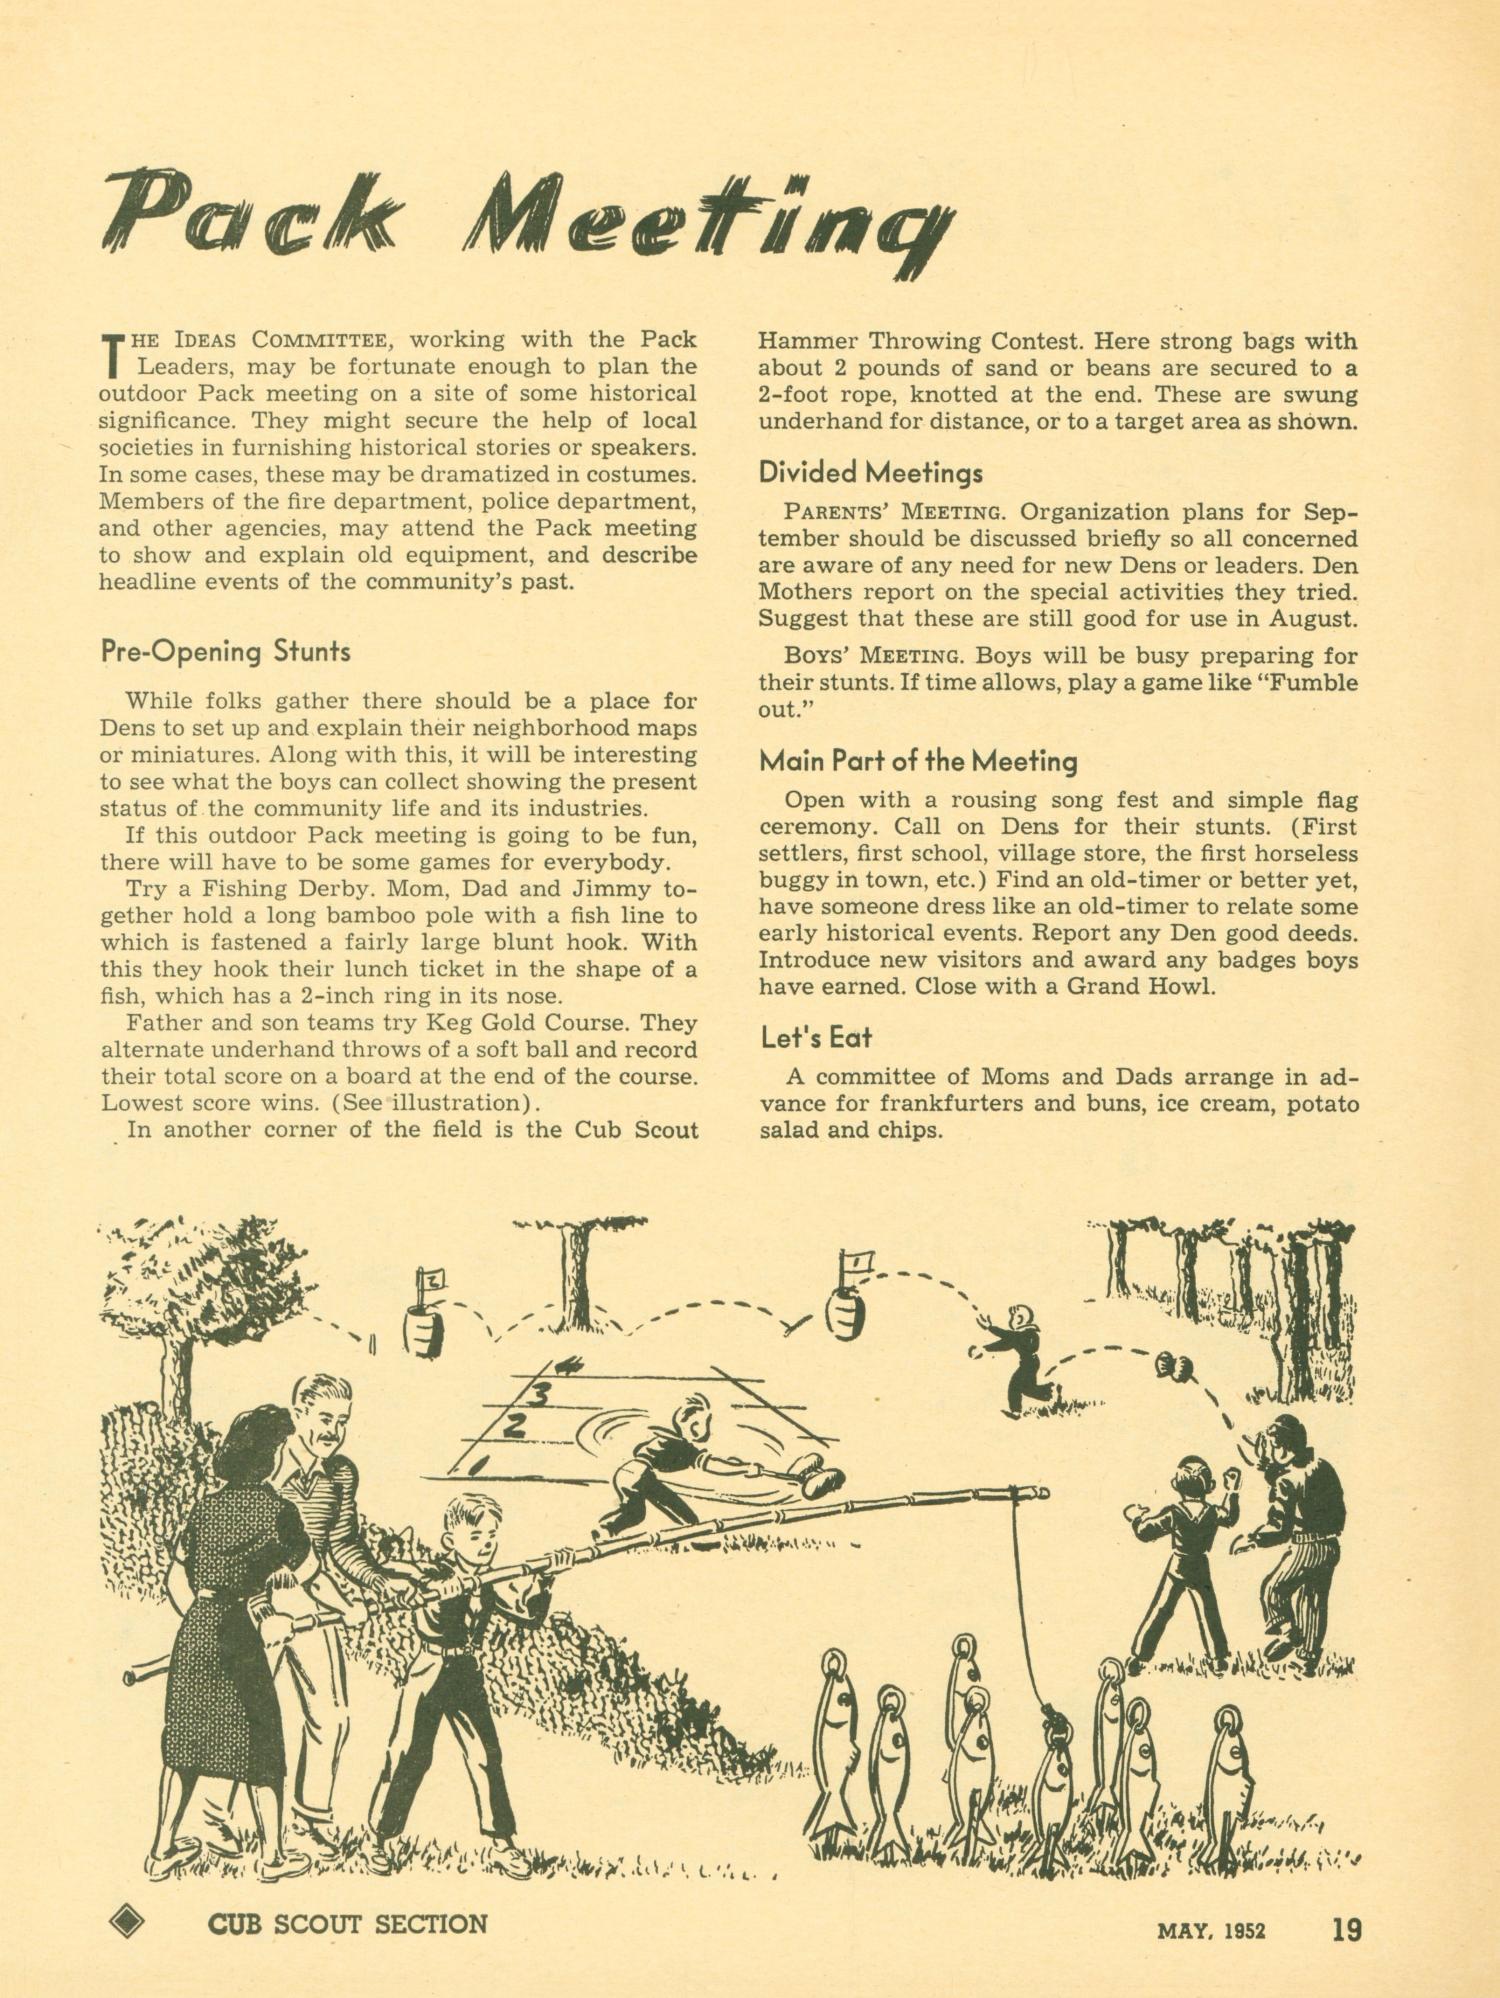 Scouting, Volume 40, Number 5, May 1952
                                                
                                                    19
                                                